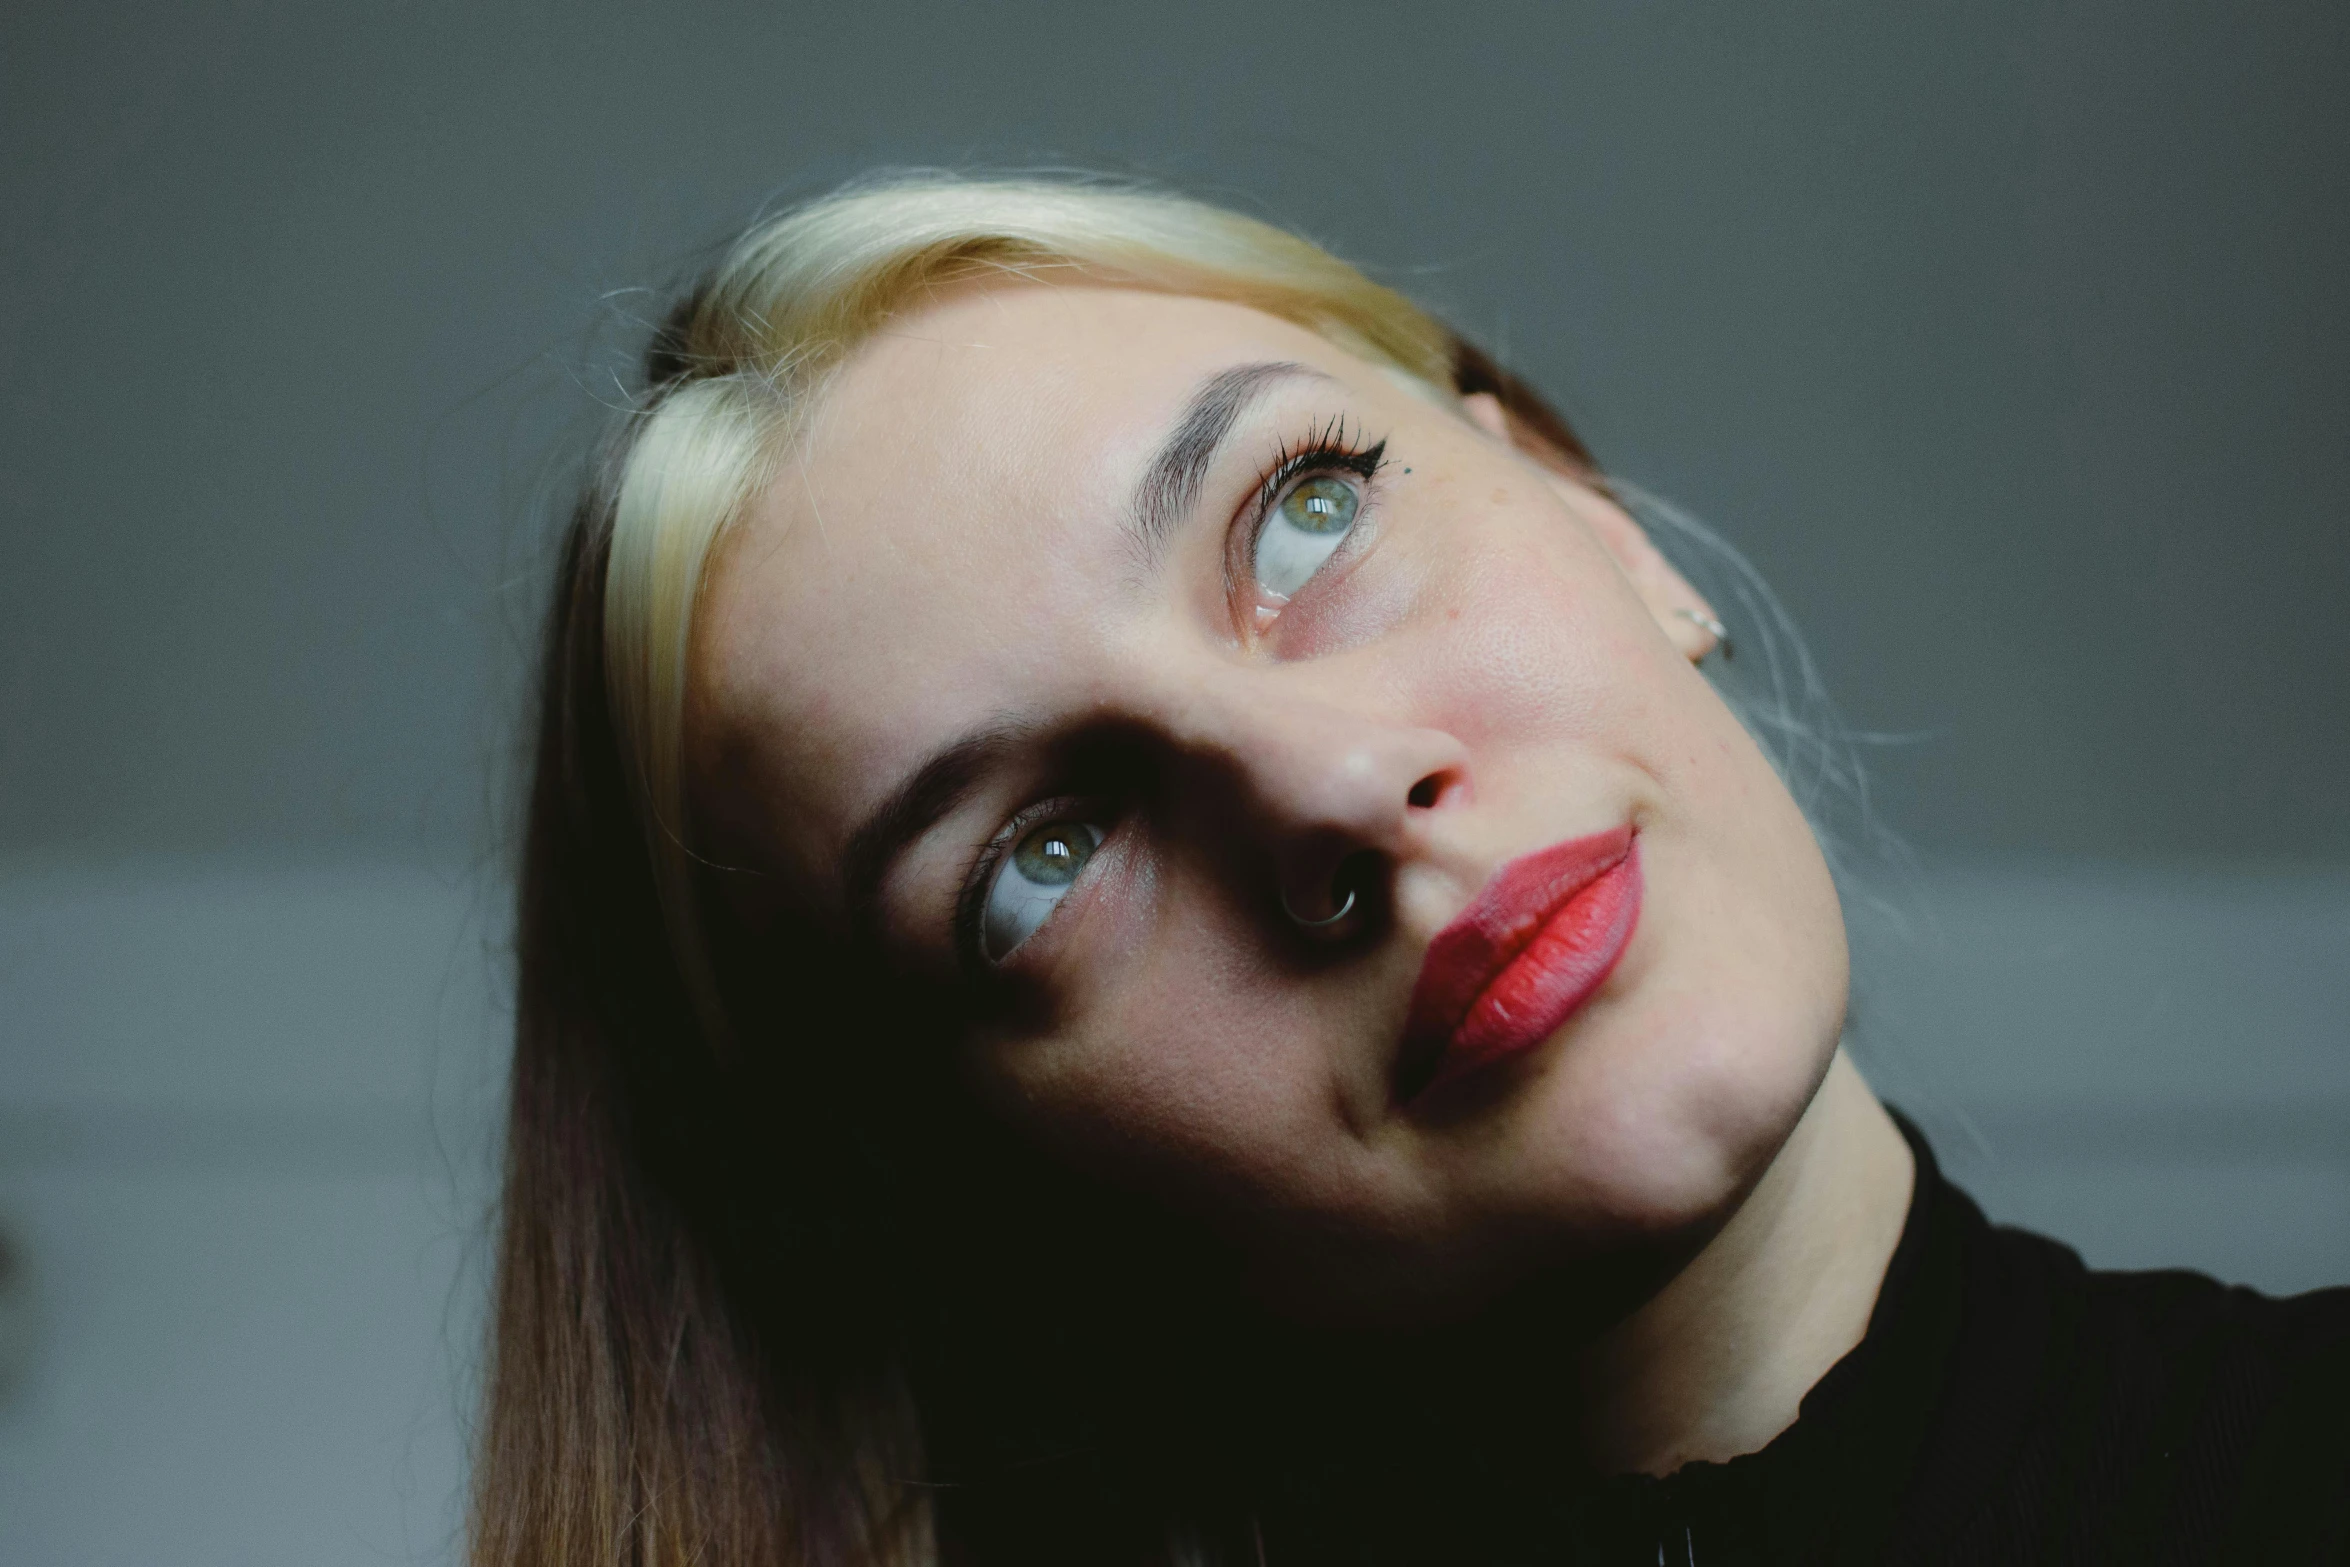 a blonde woman with long hair and red lipstick looks into the camera